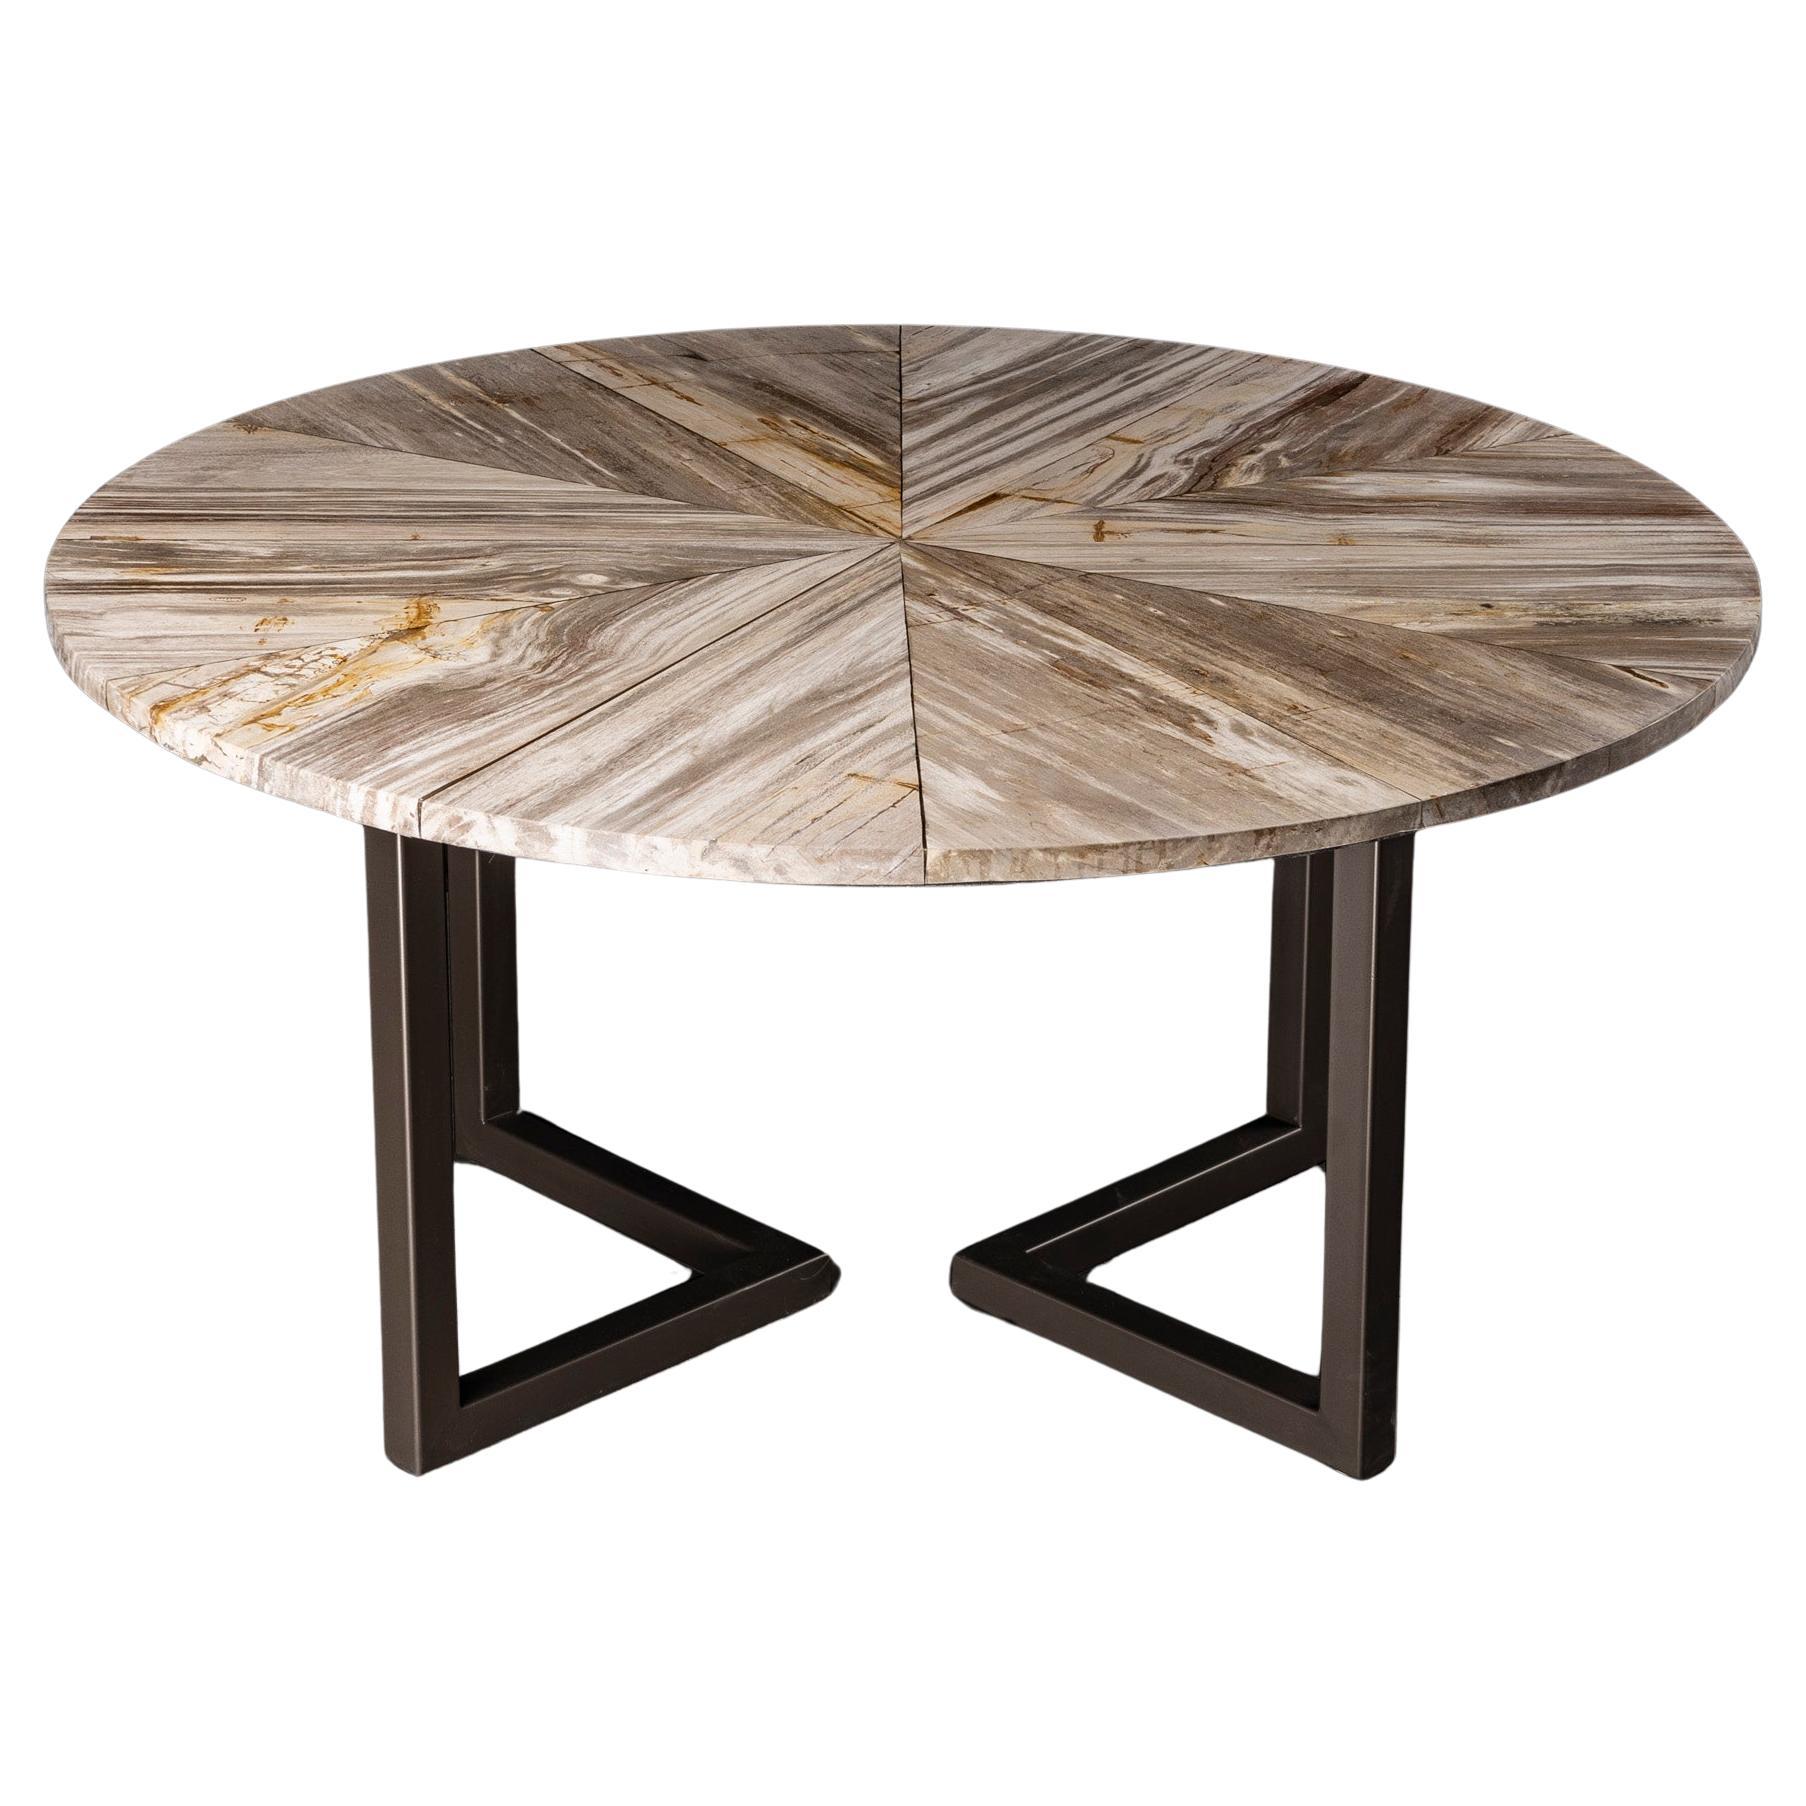 60" Round Petrified Wood Dinning Table with Metal Base For Sale